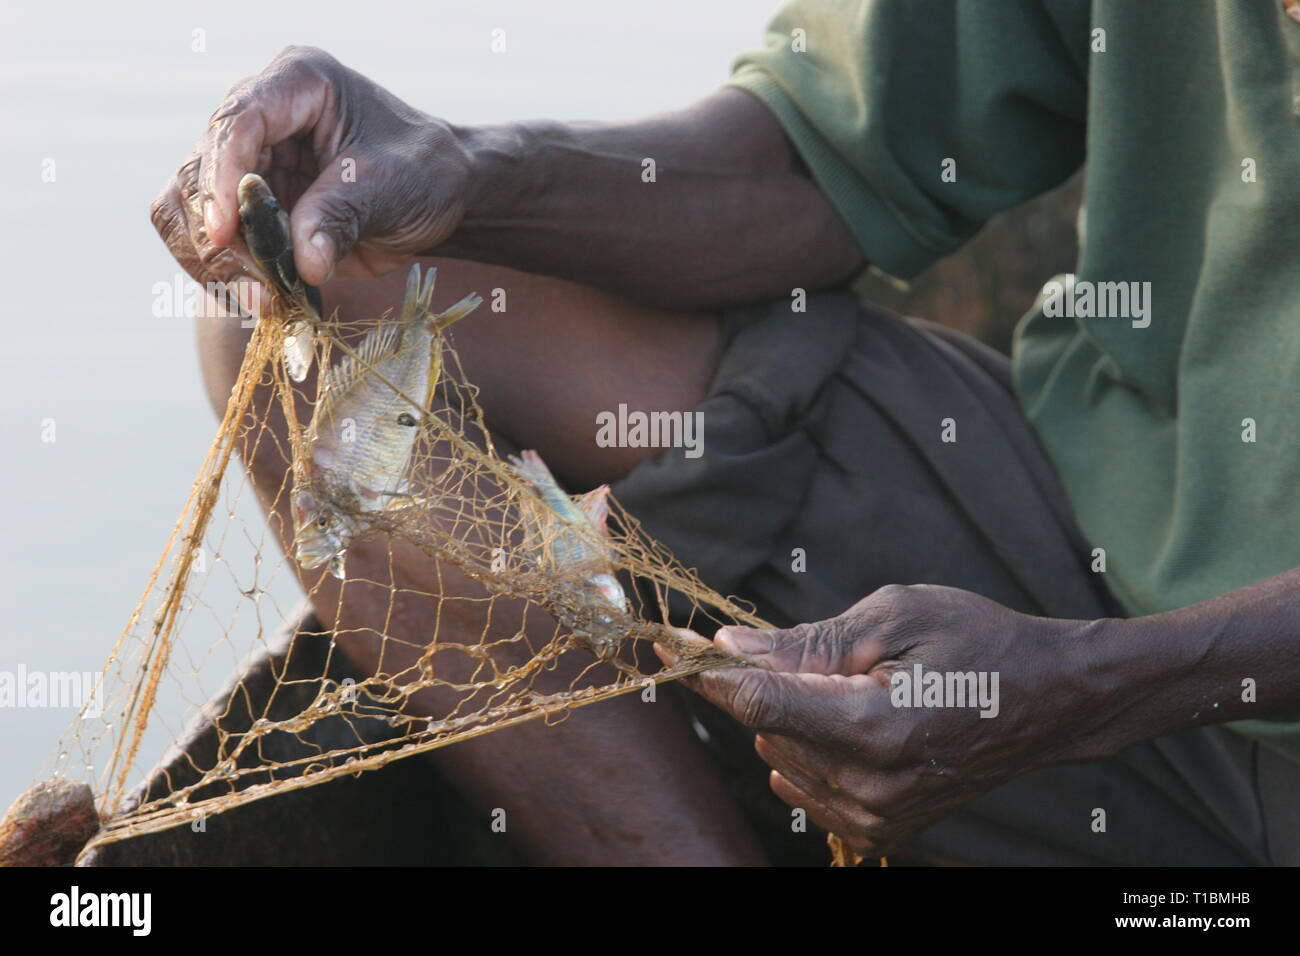 A fisherman on Lake Victoria catches three tiny immature fish using a net that is illegal, as its dimensions are too small. Stock Photo